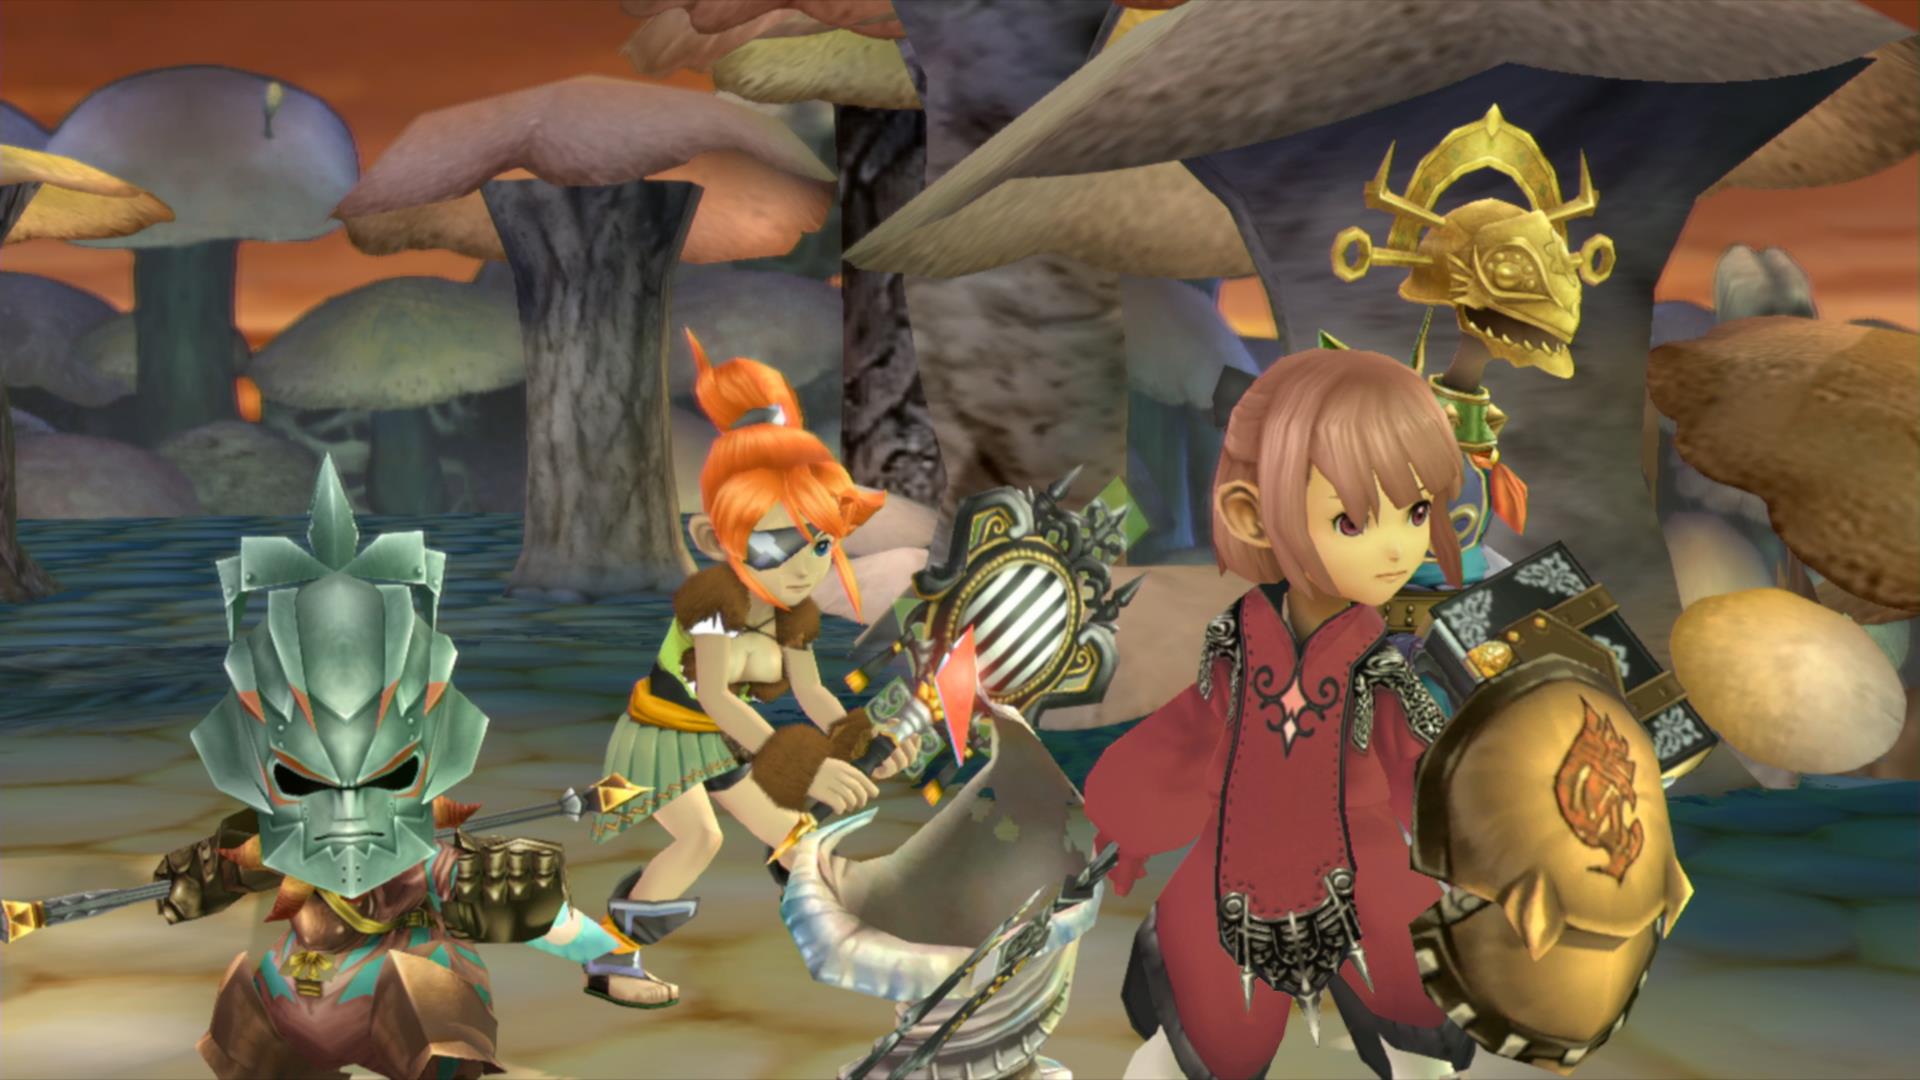 Final Fantasy Crystal Chronicles Remastered launches August in Japan